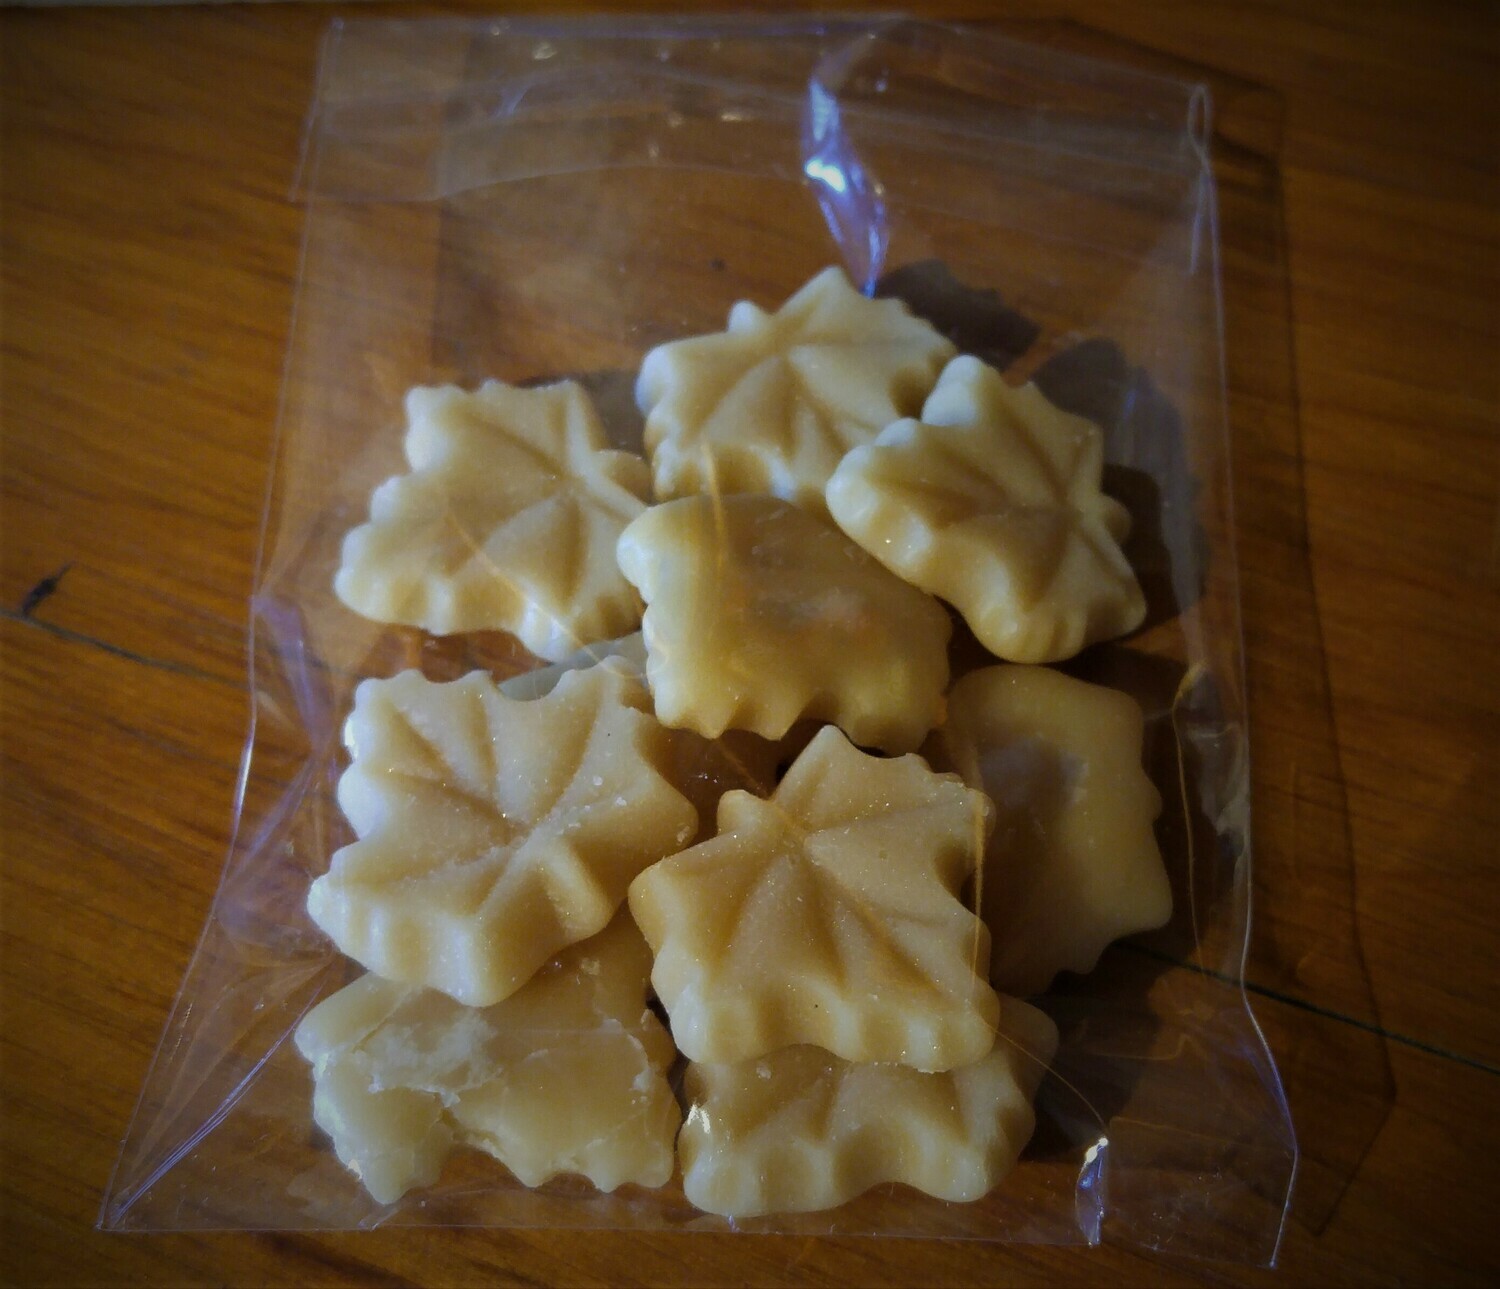 Package of 10 Small Pure Maple Sugar Candies - Available for pickup orders only - Not shipped